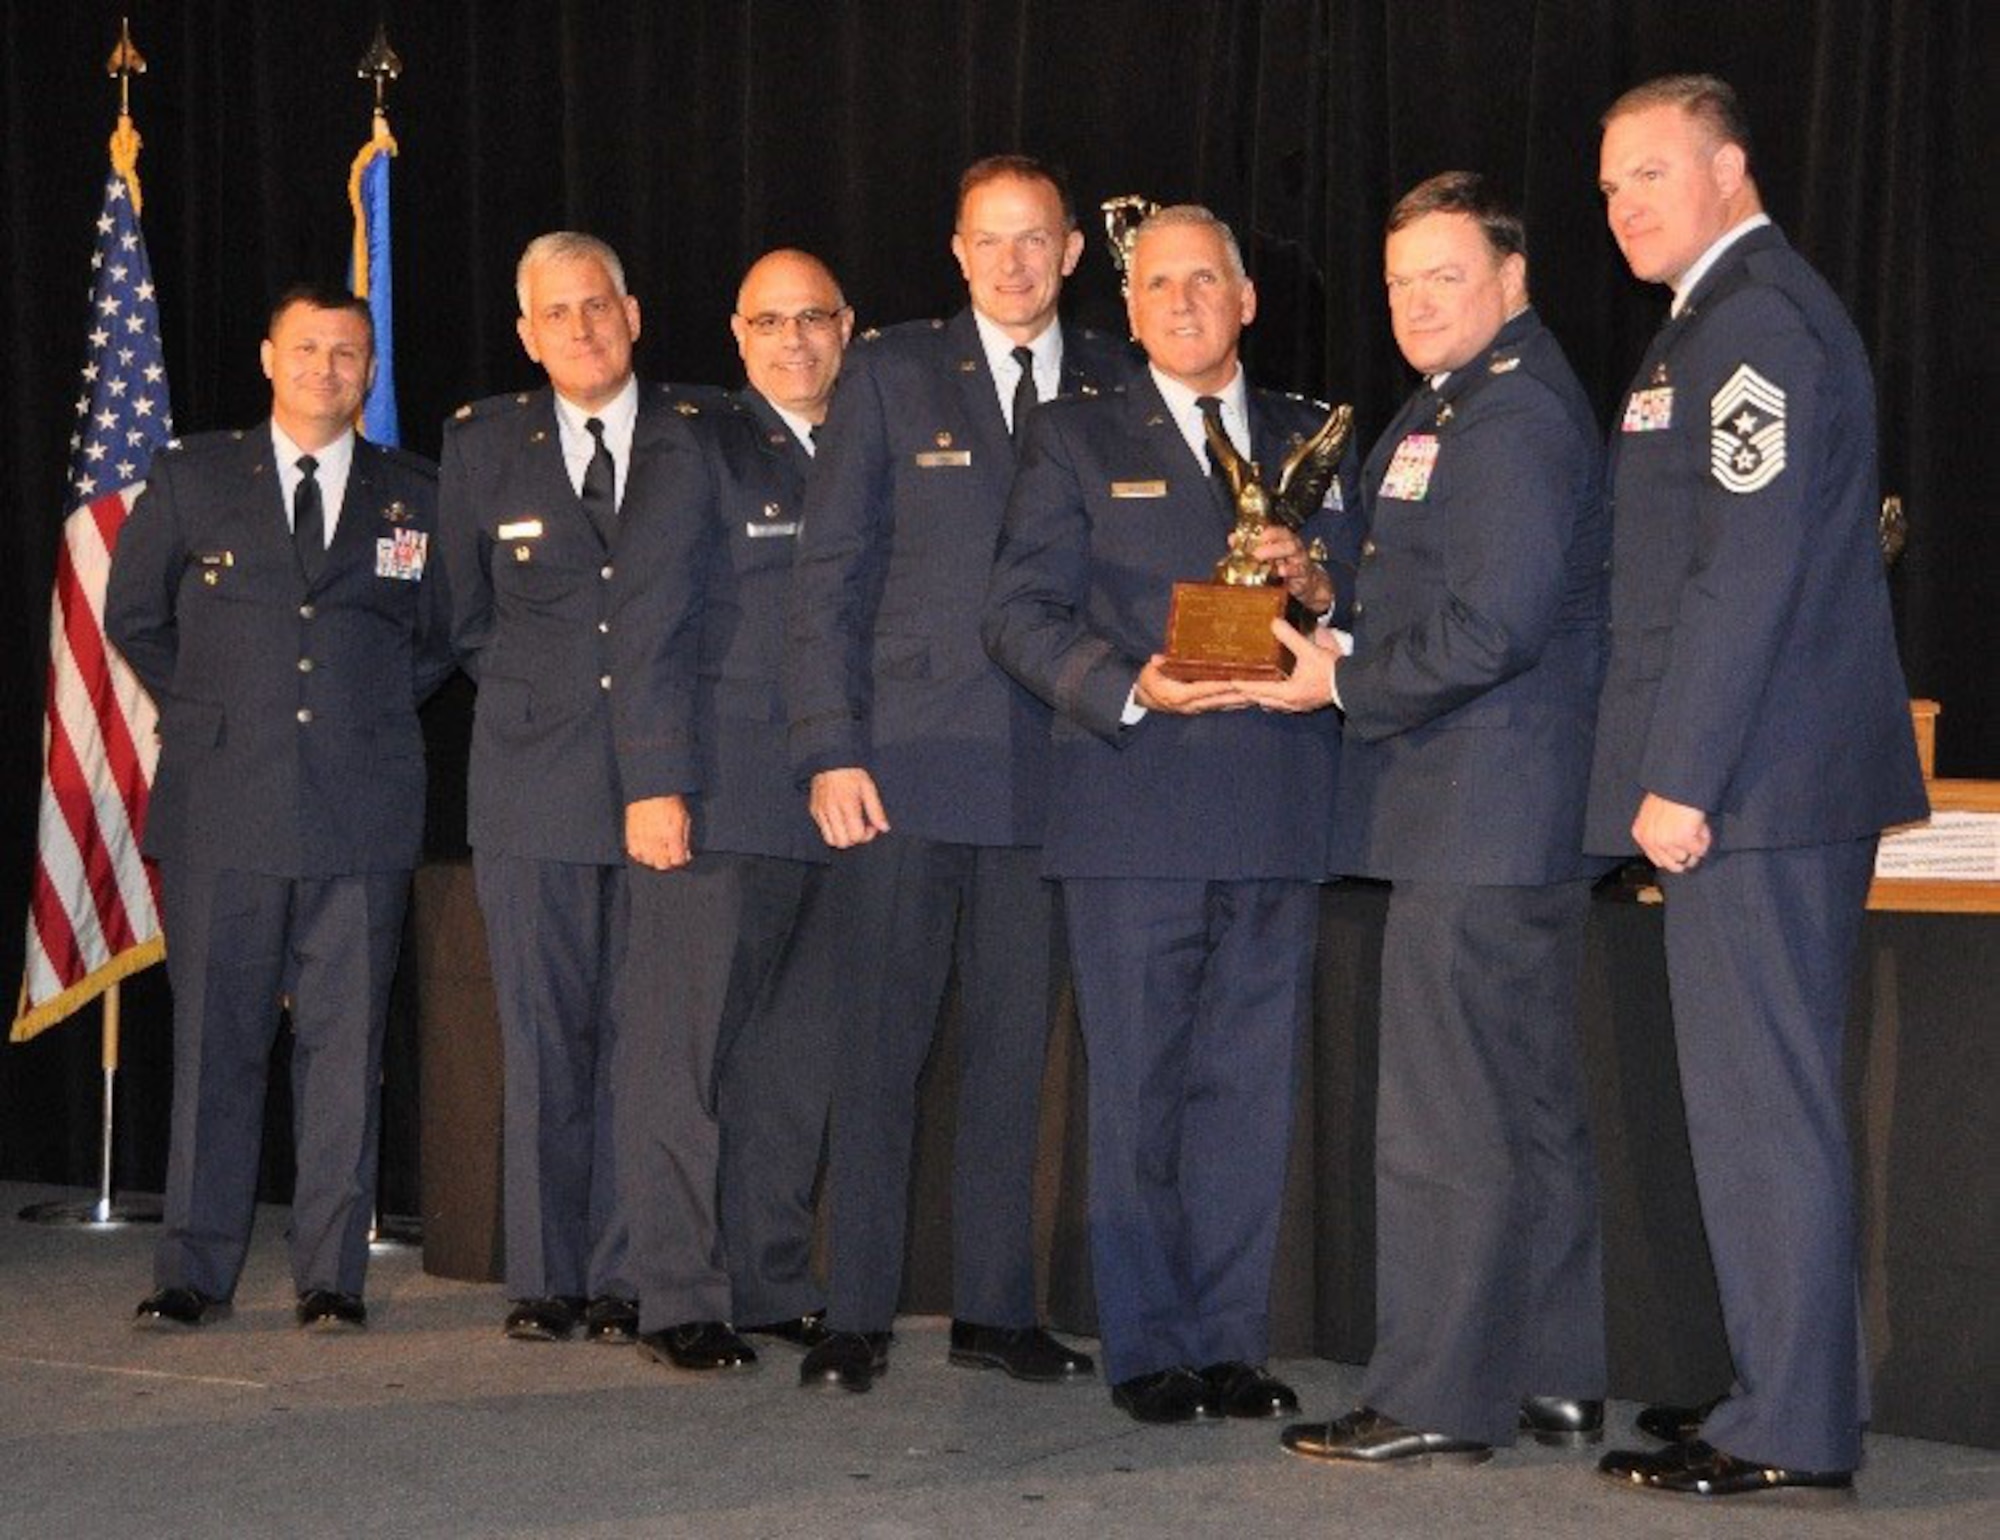 Representatives from the 514th Air Mobility Wing, Joint Base McGuire-Dix-Lakehurst, New Jersey, accept the 2016 Aircrew Excellence Award on behalf of their 732nd Airlift Squadron aircrew at the 17th Annual Raincross Dinner in Riverside, California, Oct. 20, 2016. From left are Col. Lee Merkle, director, Air and Space Operations, Plans and Programs, 4th Air Force; Lt. Col. Rustin Redlin, deputy commander, 514th Mission Support Group; Col. Anthony Esposito, commander, 514th Maintenance Group; Col. Robert Dunham, commander, 514th Operations Group; Maj. Gen. John C. Flournoy Jr., commander, 4th Air Force; Col. David Pavey, commander, 514 AMW; Chief Master Sgt. Matthew Muldowney, command chief, 514 AMW. (U.S. Air Force photo/Linda Welz)
